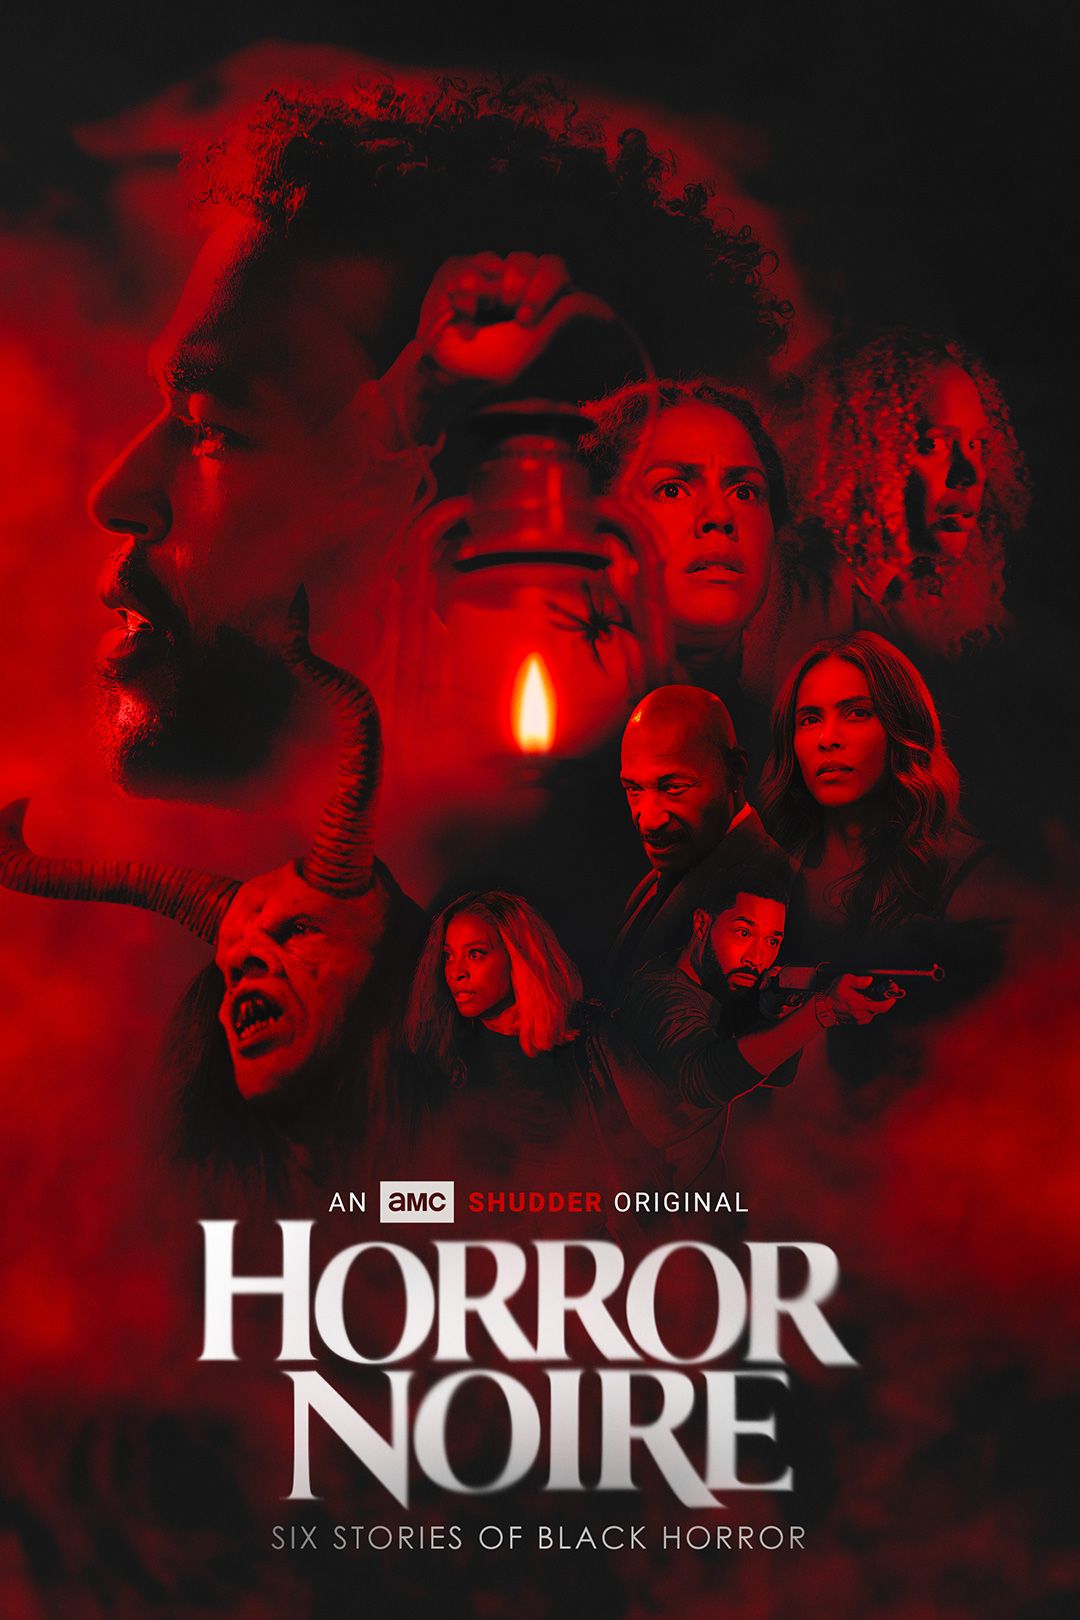 Horror Noire 2021 Cover Art: Collection of cast leads looking away under a blood red filter with a red light in the center